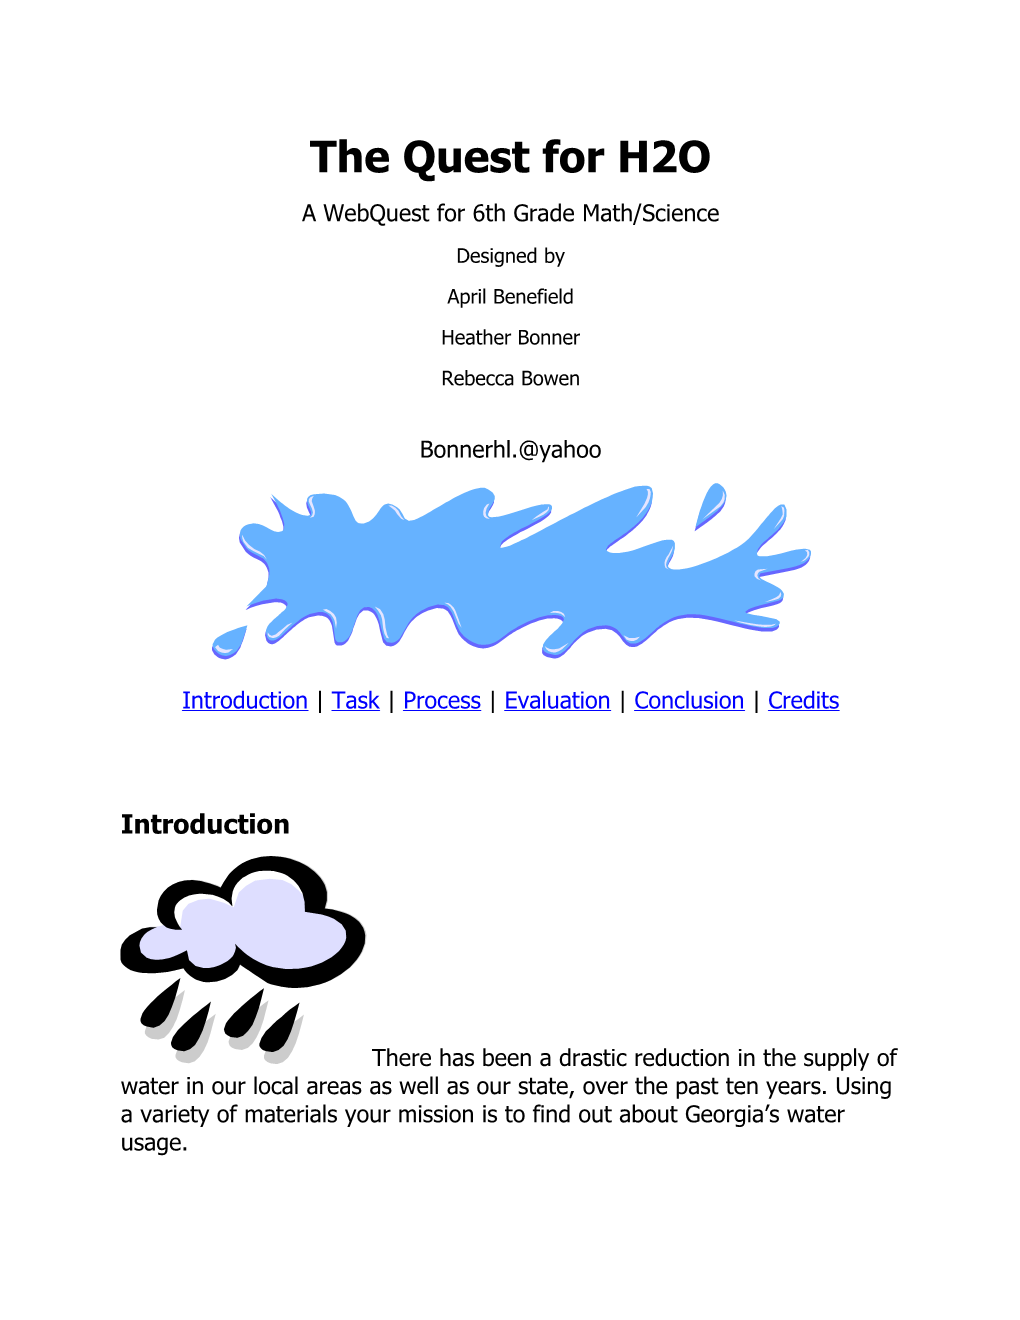 The Quest for H2O